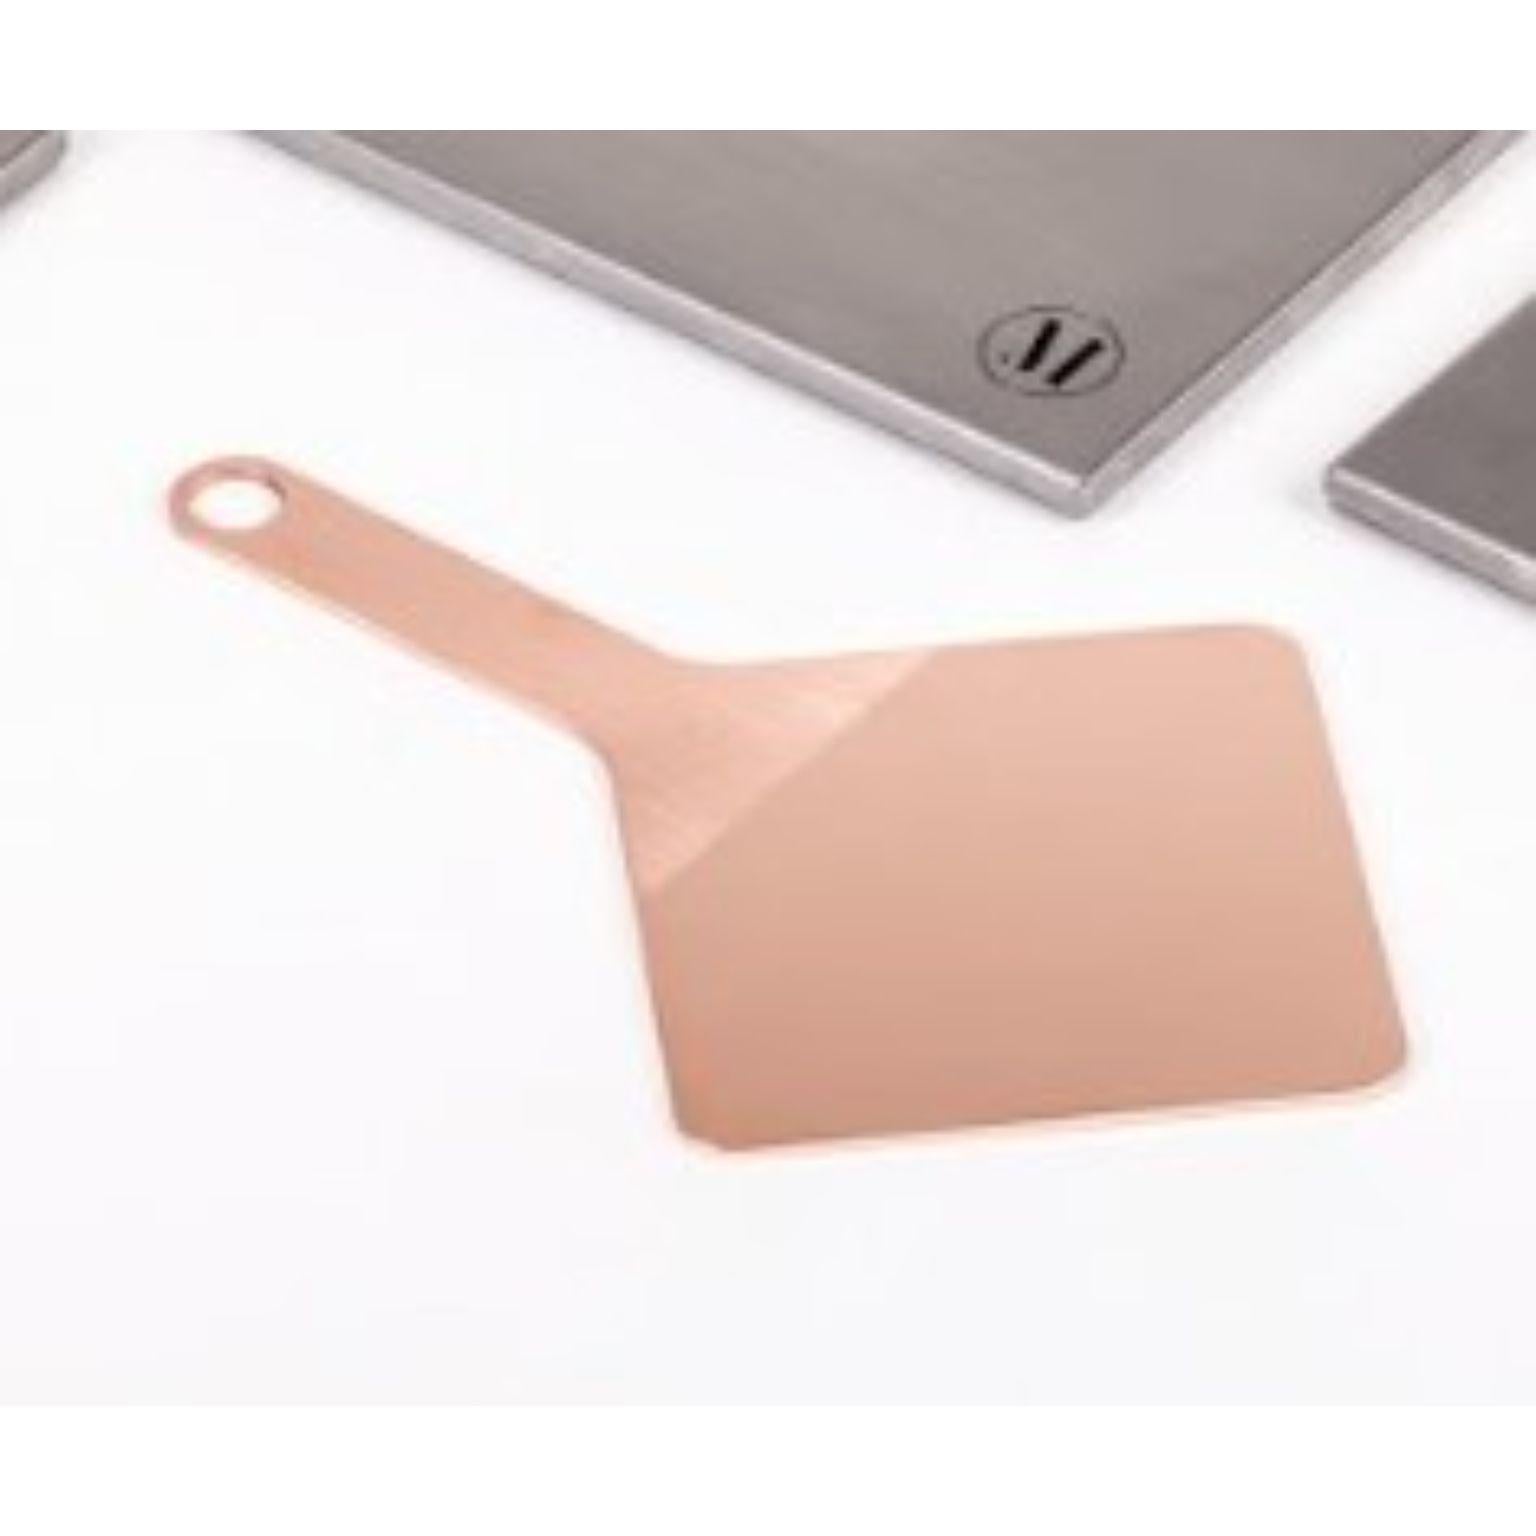 Shapes mirrors square by Mingardo
Dimensions: D19 x H30 cm 
Materials: Polished natural copper with handle in satin natural copper. Box in satin natural iron.
Weight: 1-3 kg

Also Available in different finishes.

The study of the ancient